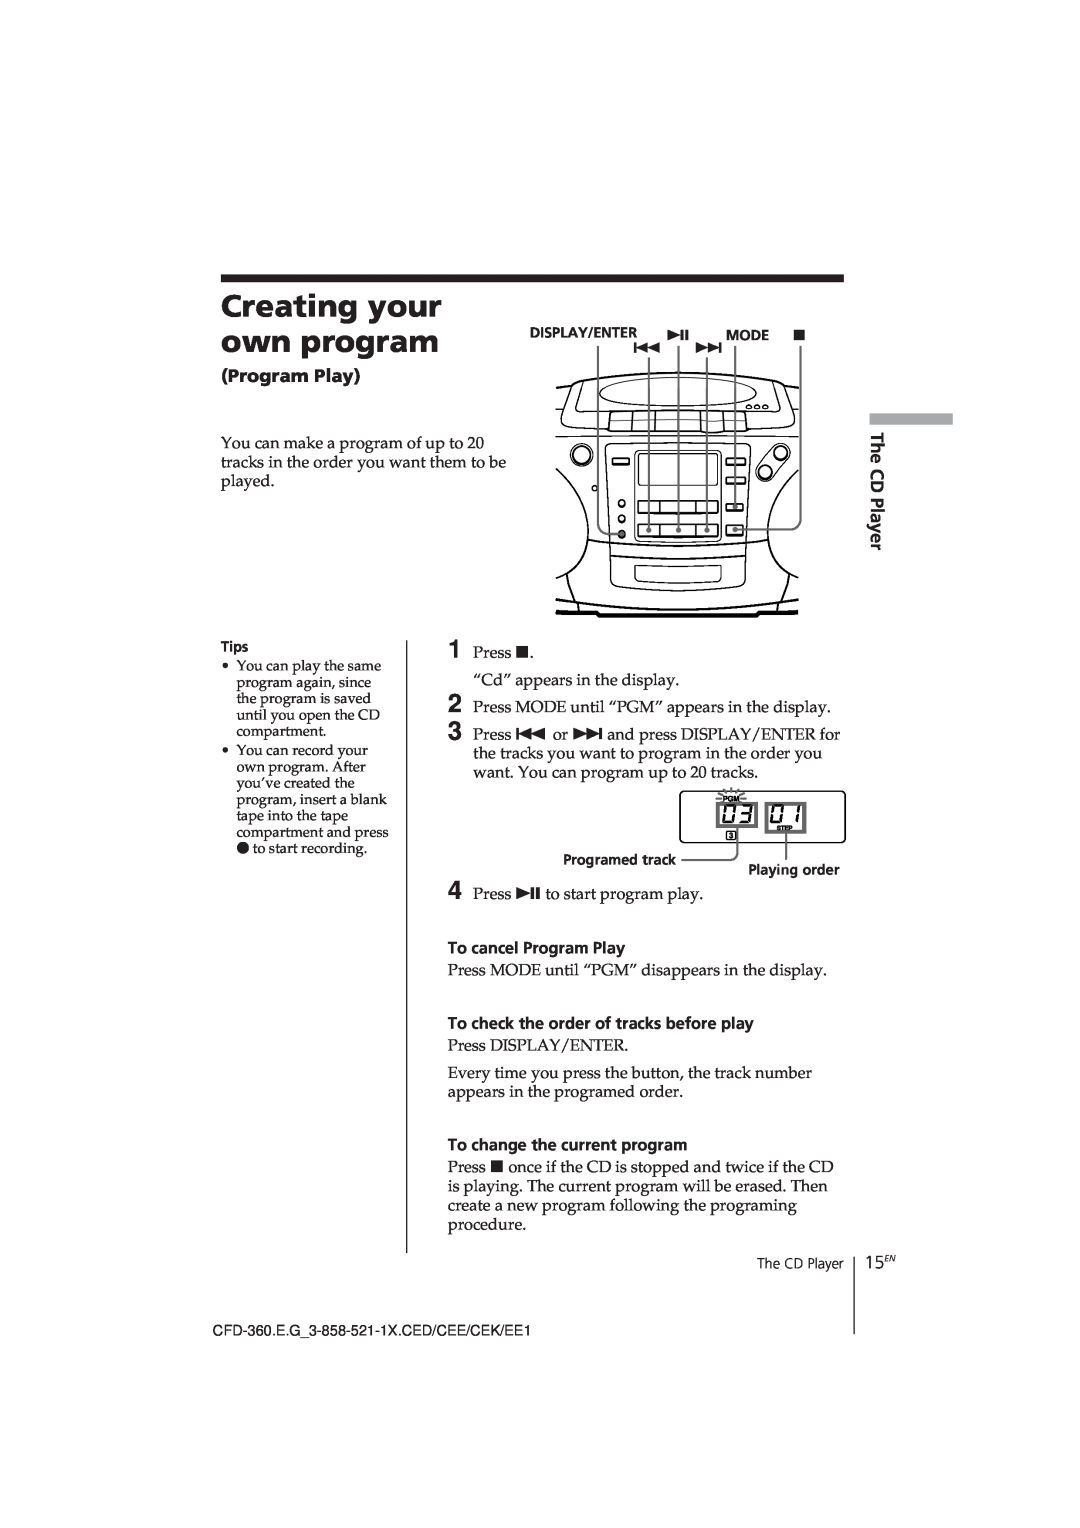 Sony CFD-360 operating instructions Creating your, own program, 15EN, Program Play, The CD Player 